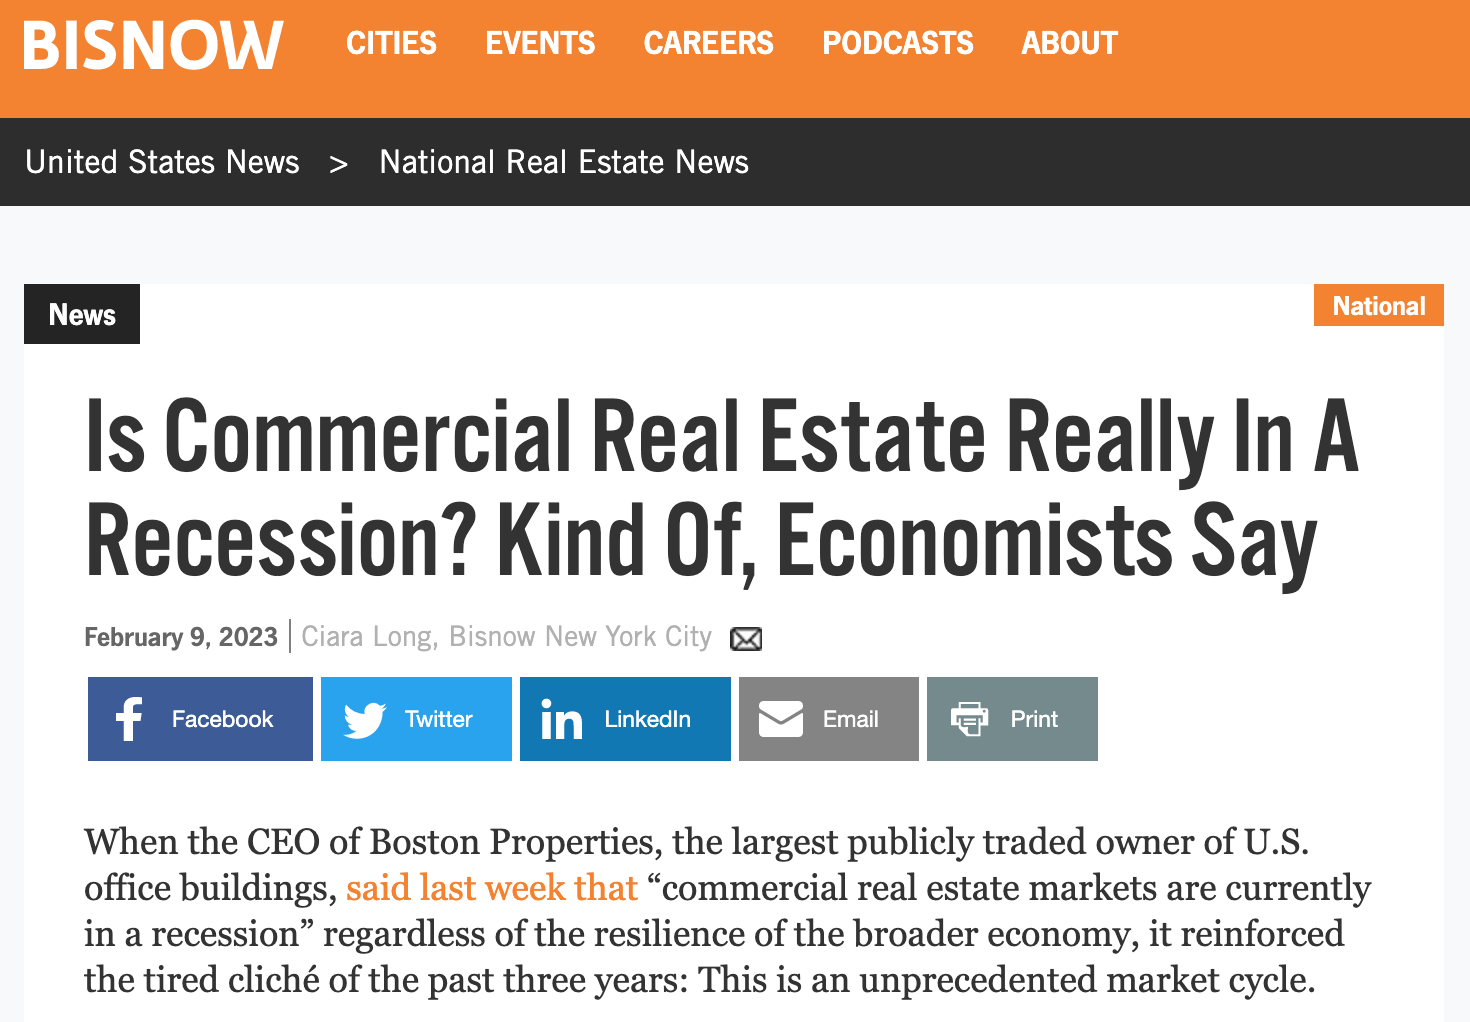 Is Commercial Real Estate Really In A Recession Economists Opinion